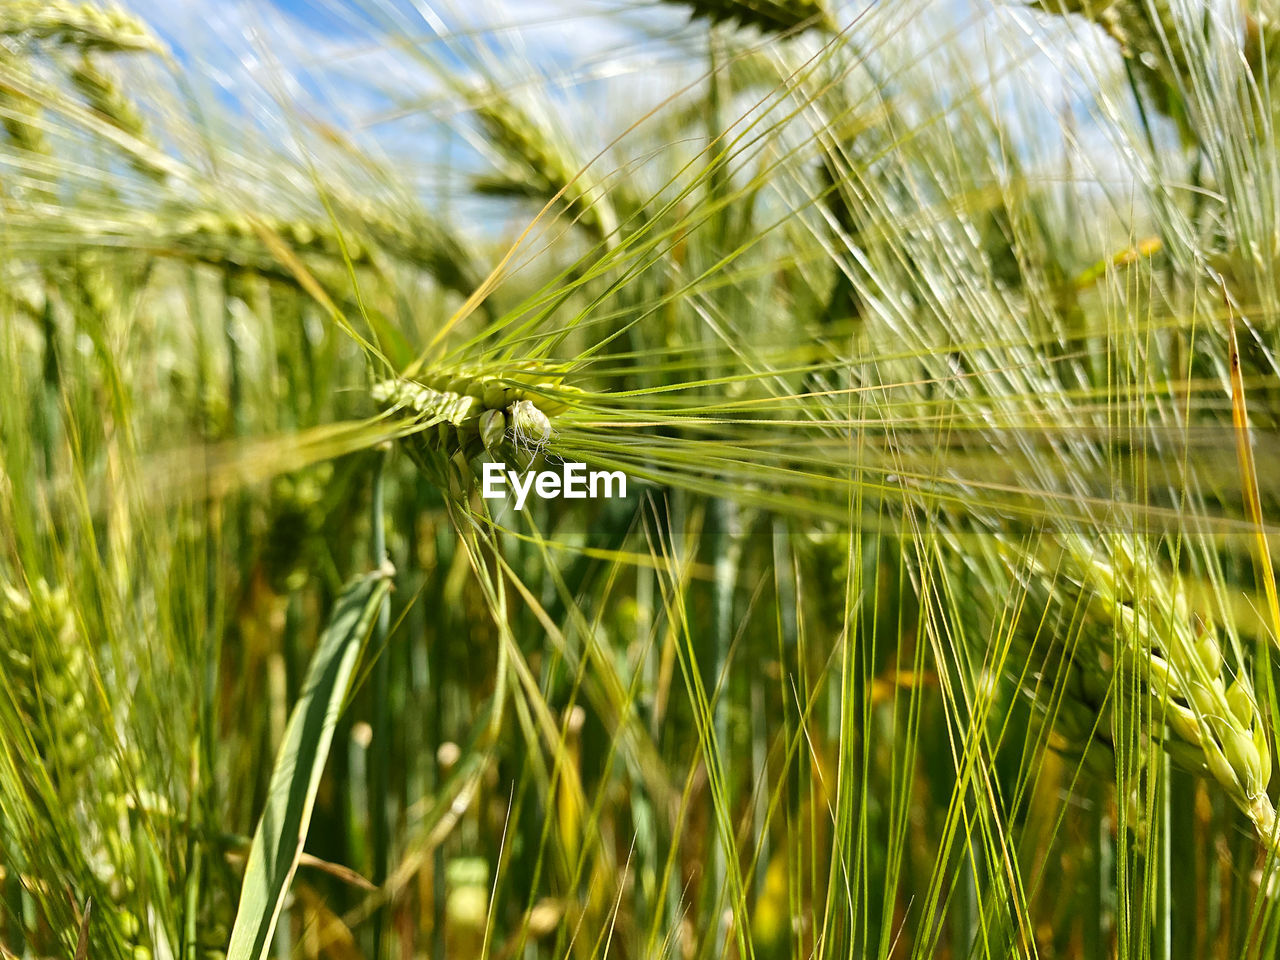 plant, agriculture, crop, cereal plant, growth, field, rural scene, food, nature, land, landscape, wheat, barley, farm, close-up, beauty in nature, hordeum, triticale, green, rye, no people, grass, focus on foreground, day, outdoors, sky, emmer, einkorn wheat, environment, sunlight, food and drink, food grain, paddy field, tranquility, cereal, selective focus, summer, ear of wheat, plant stem